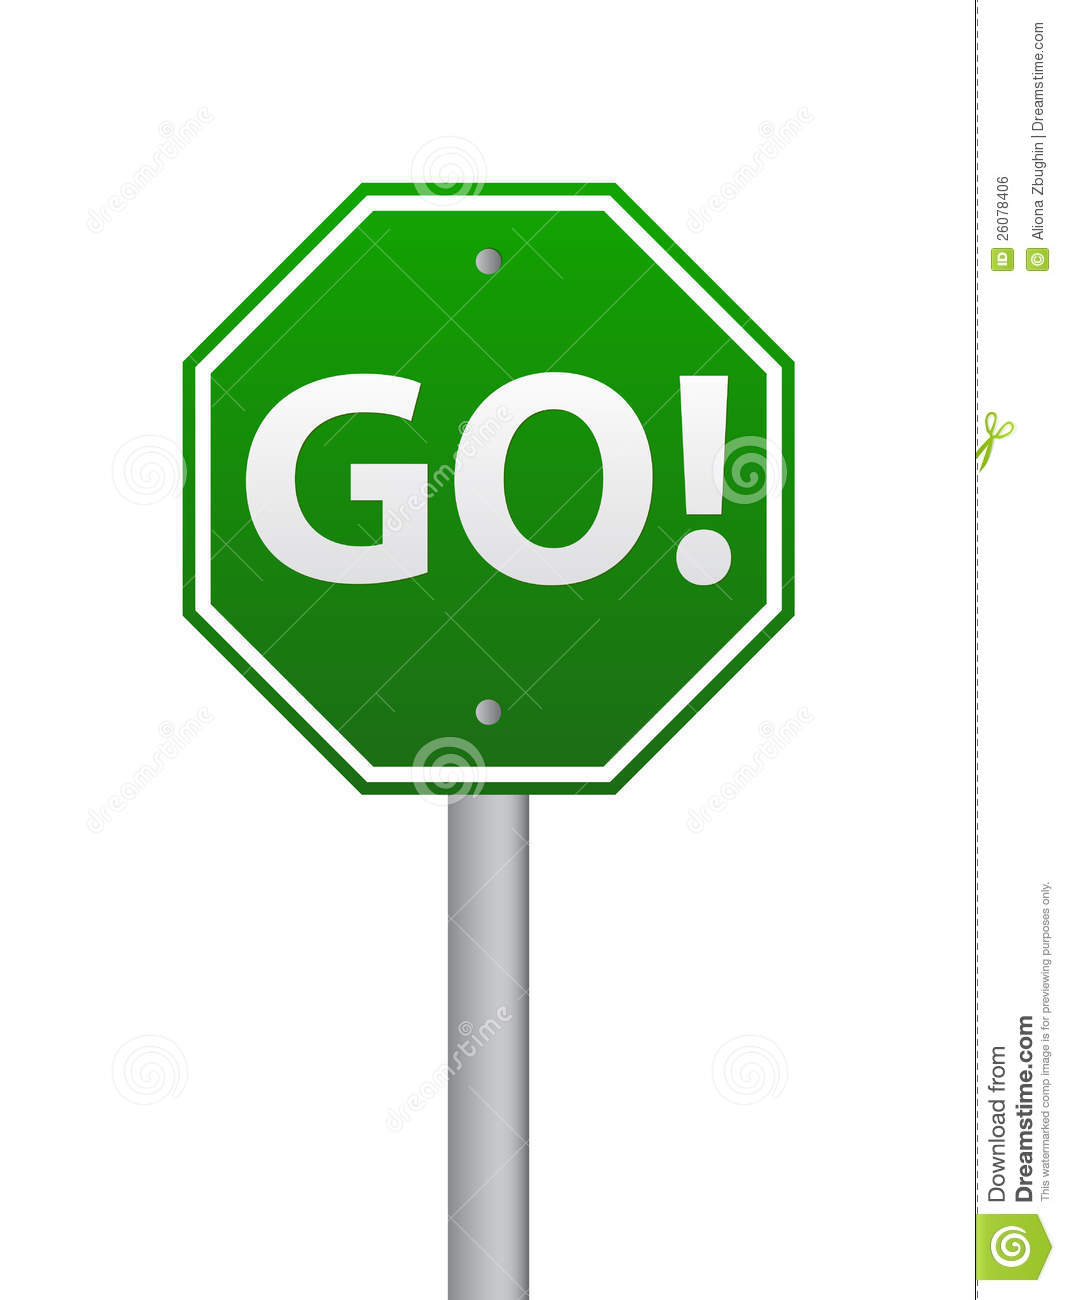 Go Road Sign Royalty Free Stock Image   Image  26078406